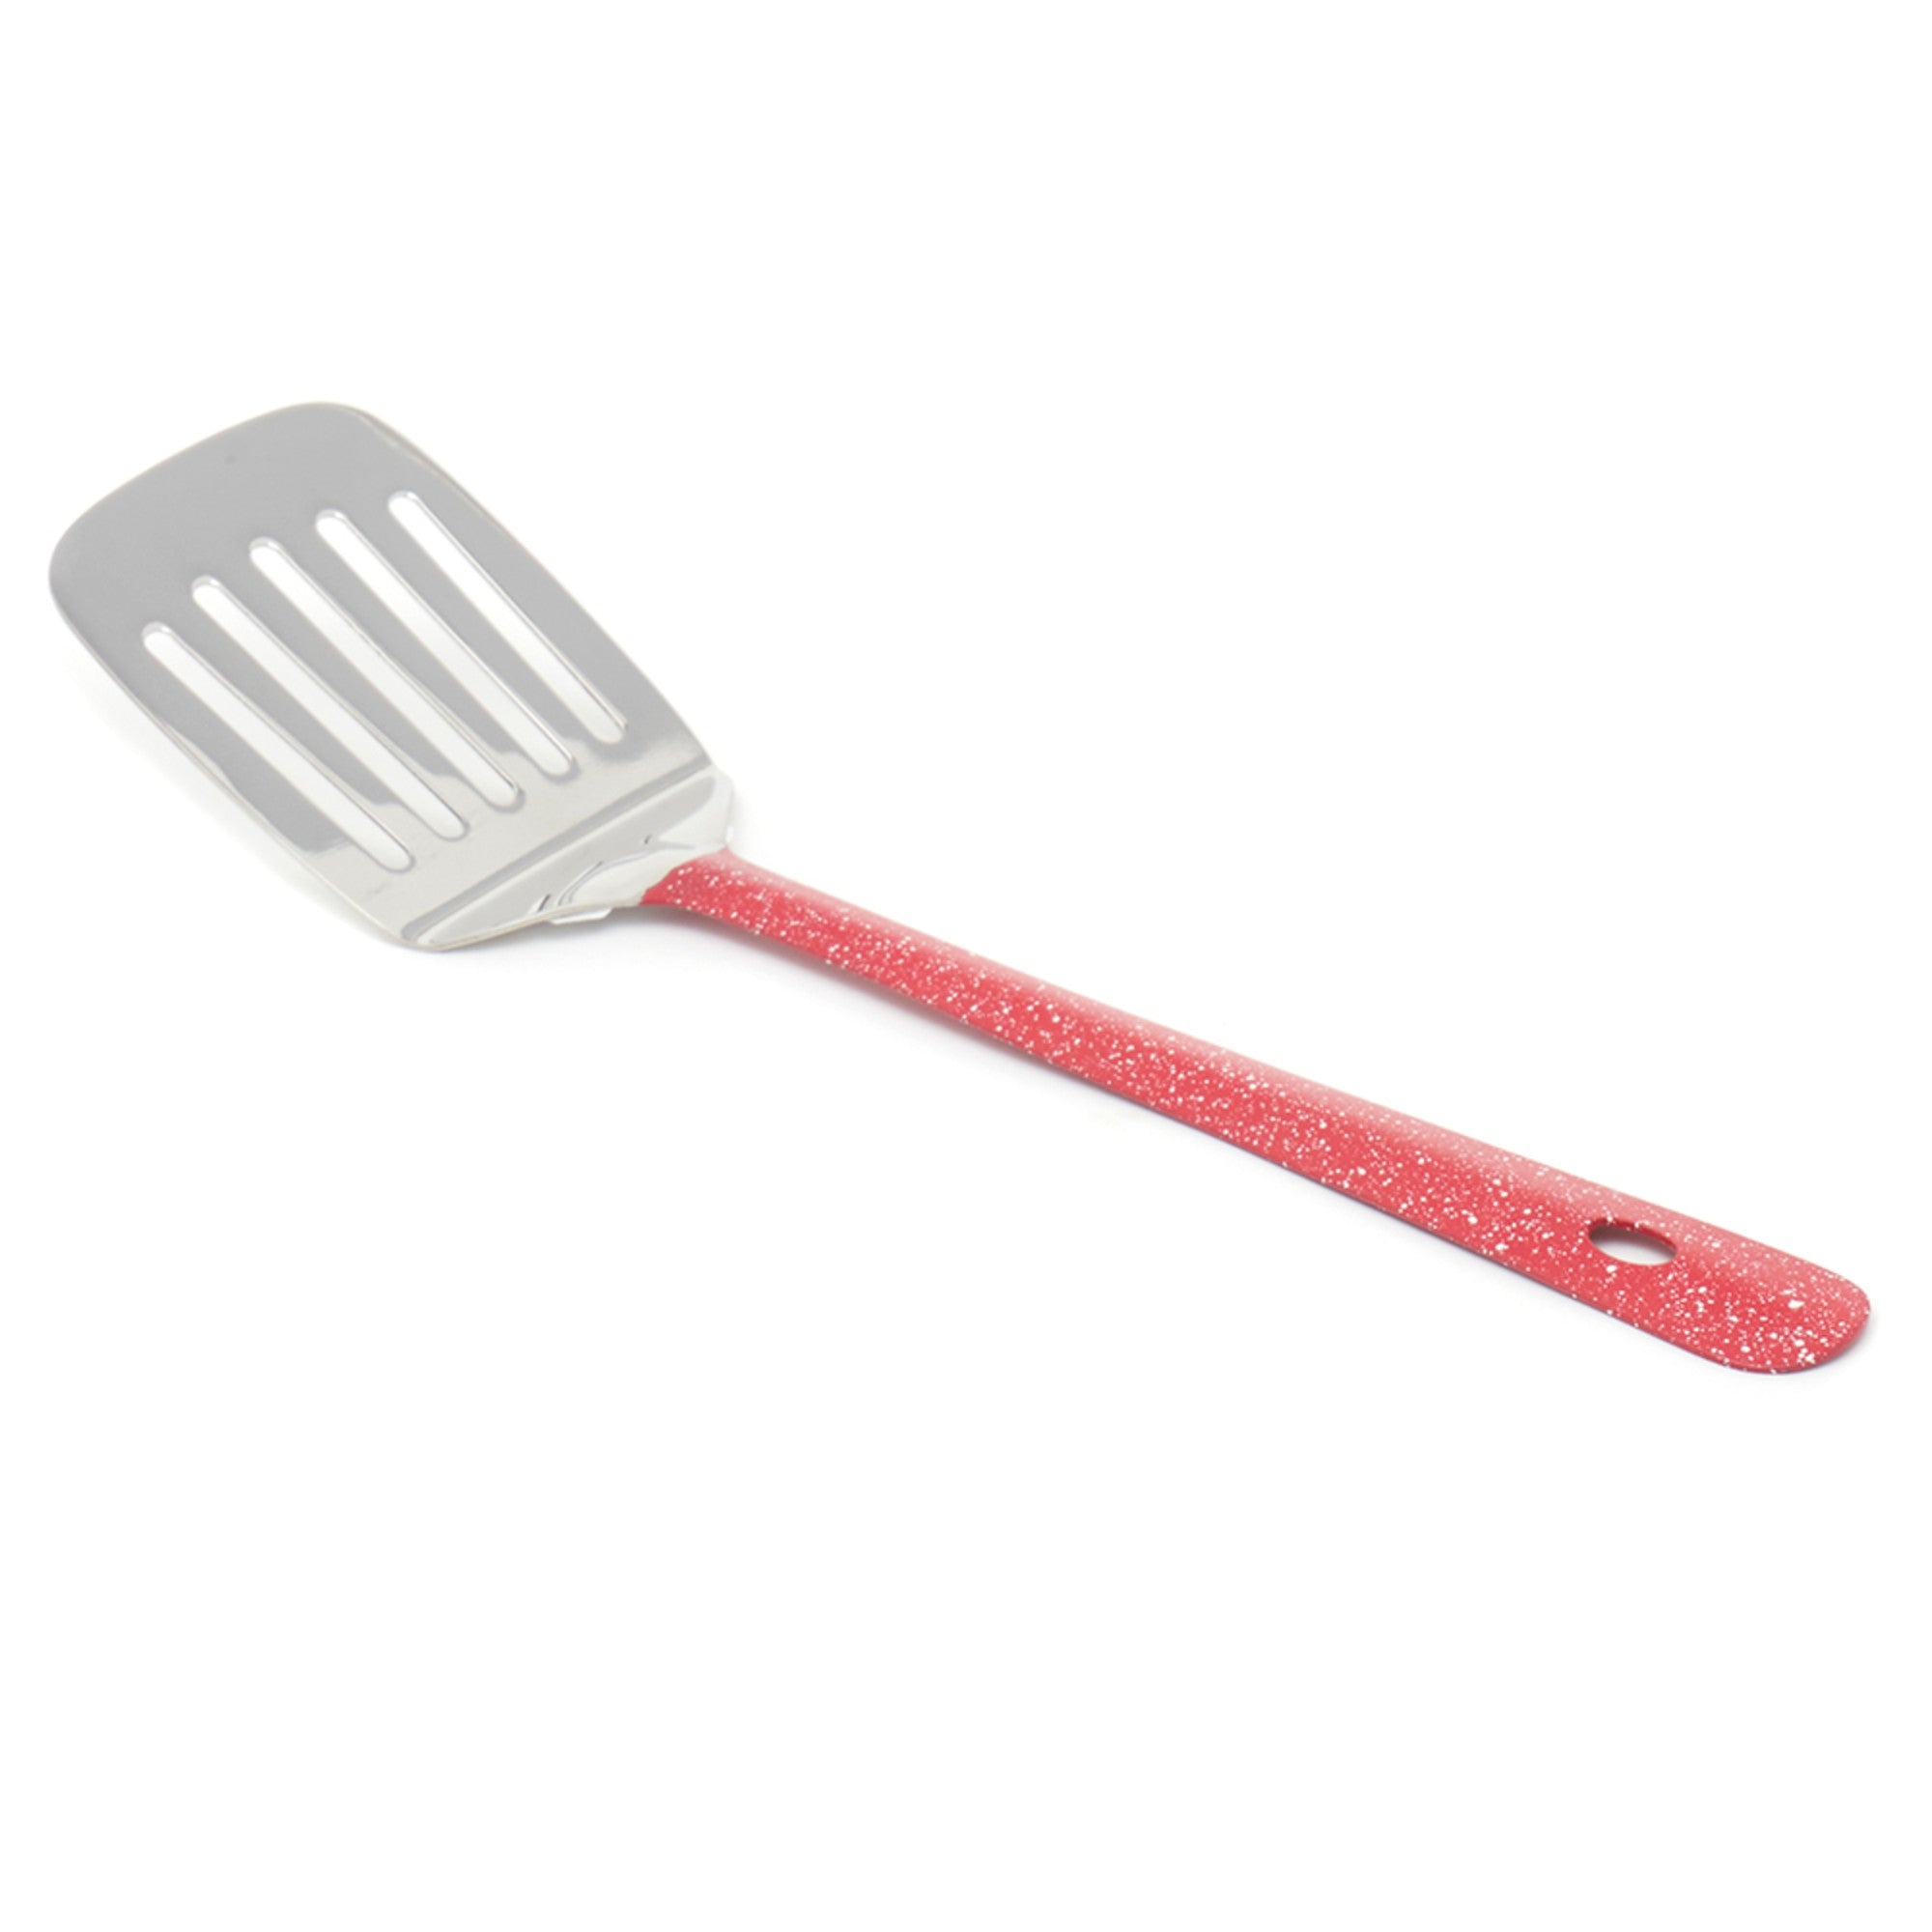 Home Basics Speckled Stainless Steel Slotted Spatula - Assorted Colors